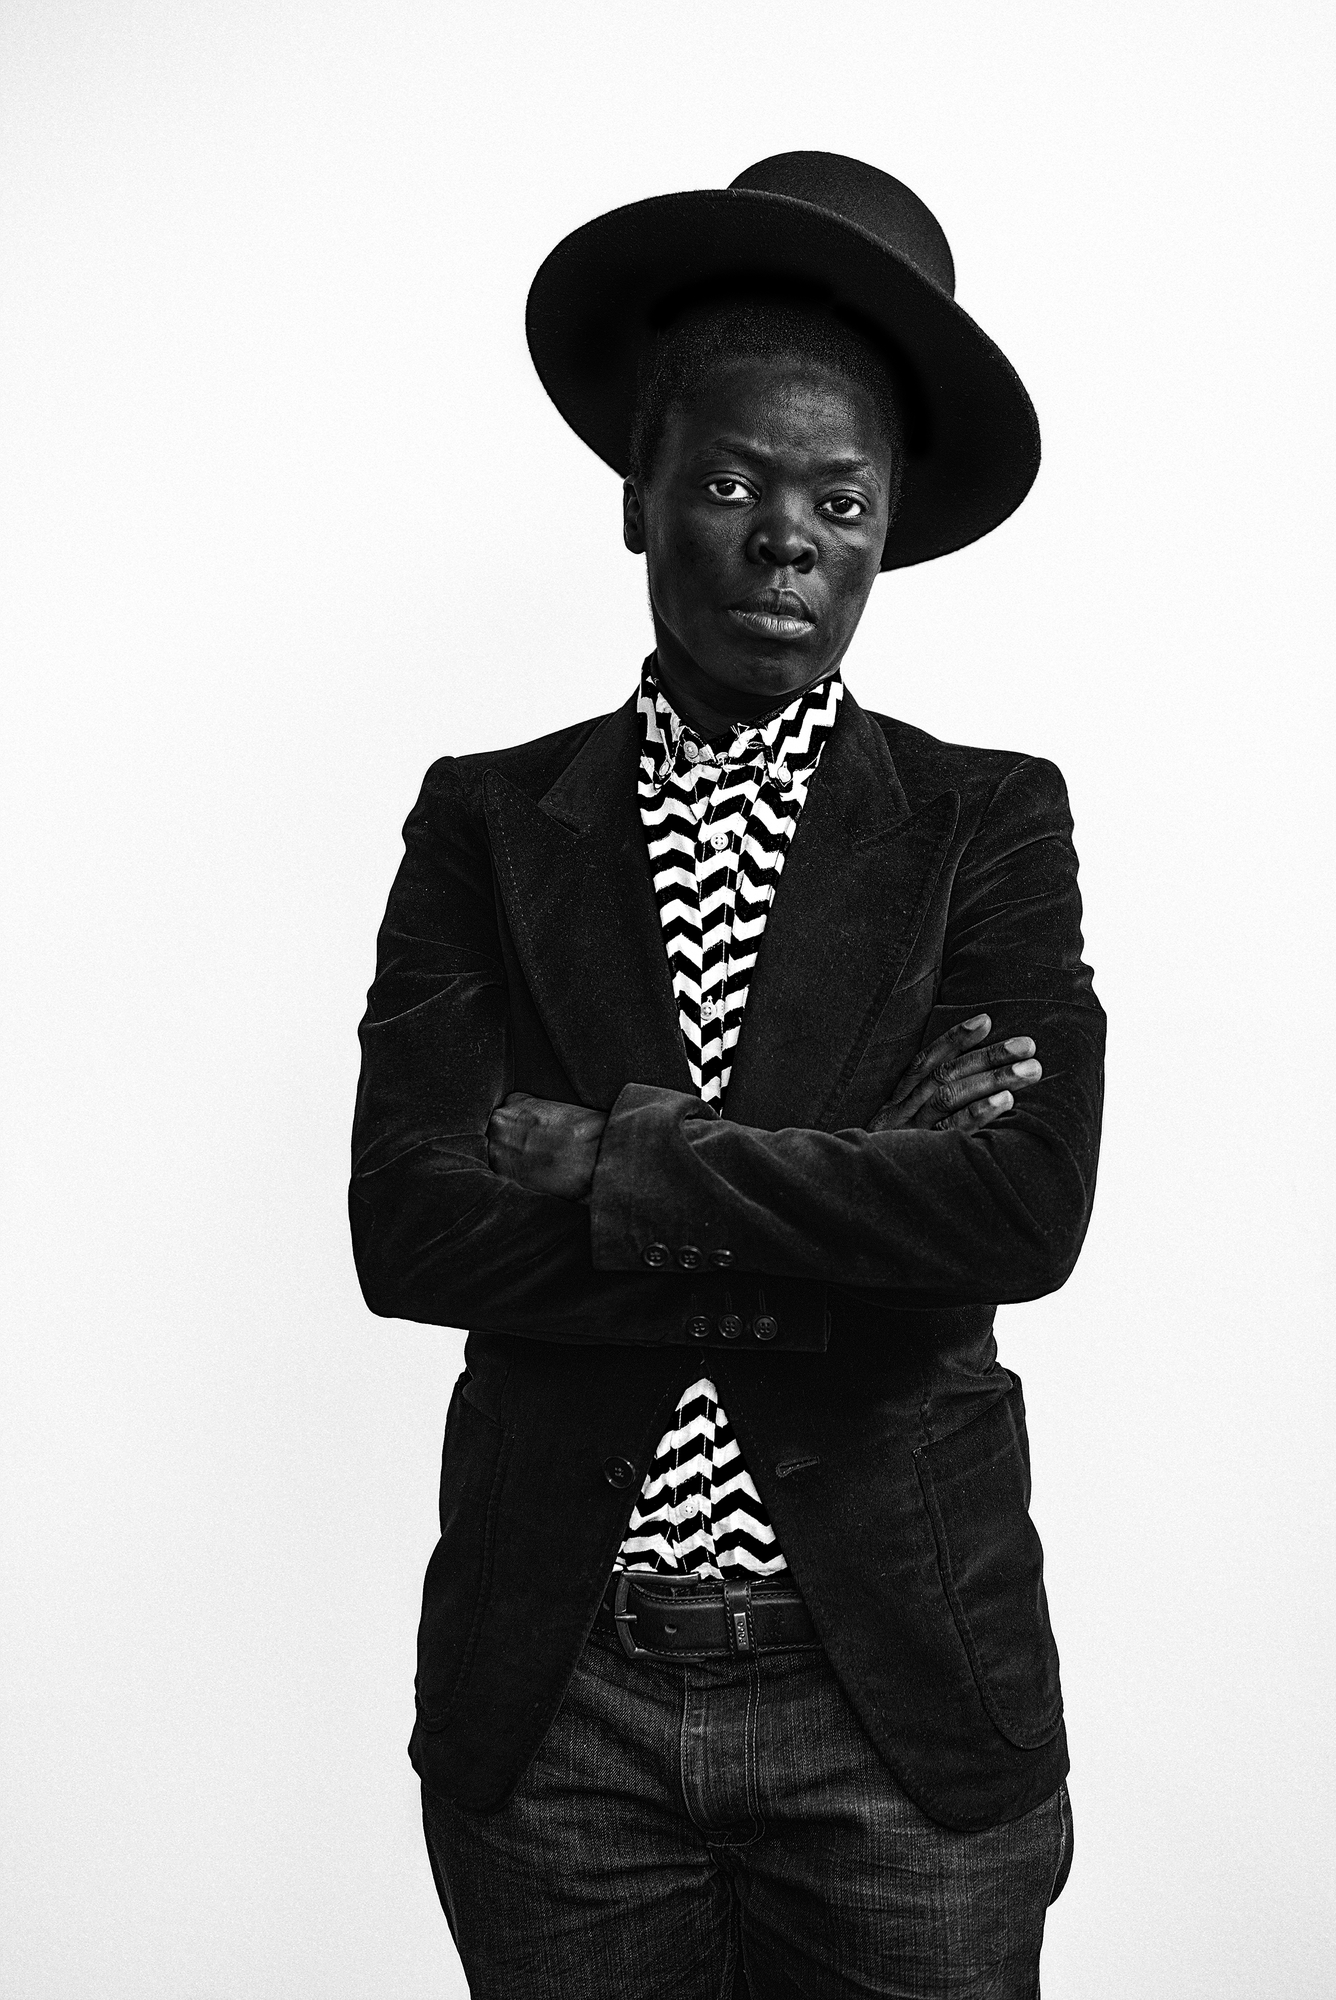 A black and white photographic self-portrait Zanele Muholi from the hips upwards with arms folded across the chest, shown wearing a hat at a jaunty angle, jeans, a black velvet jacket, and a black and white zig-zagged patterned shirt.